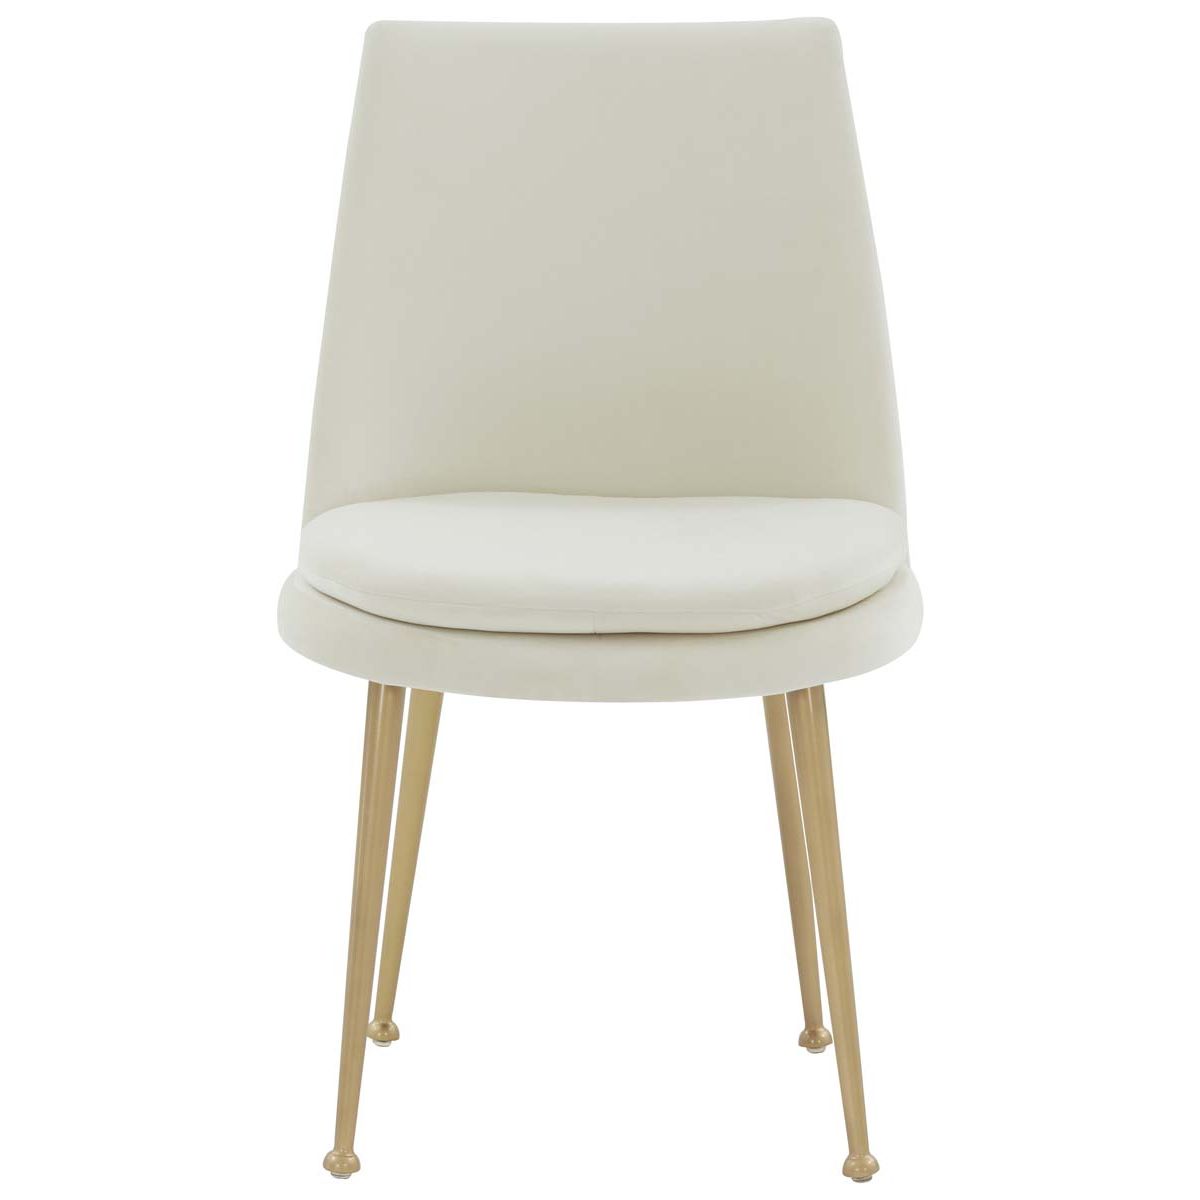 Safavieh Couture Rynaldo Upholstered Dining Chair - Cream / Gold